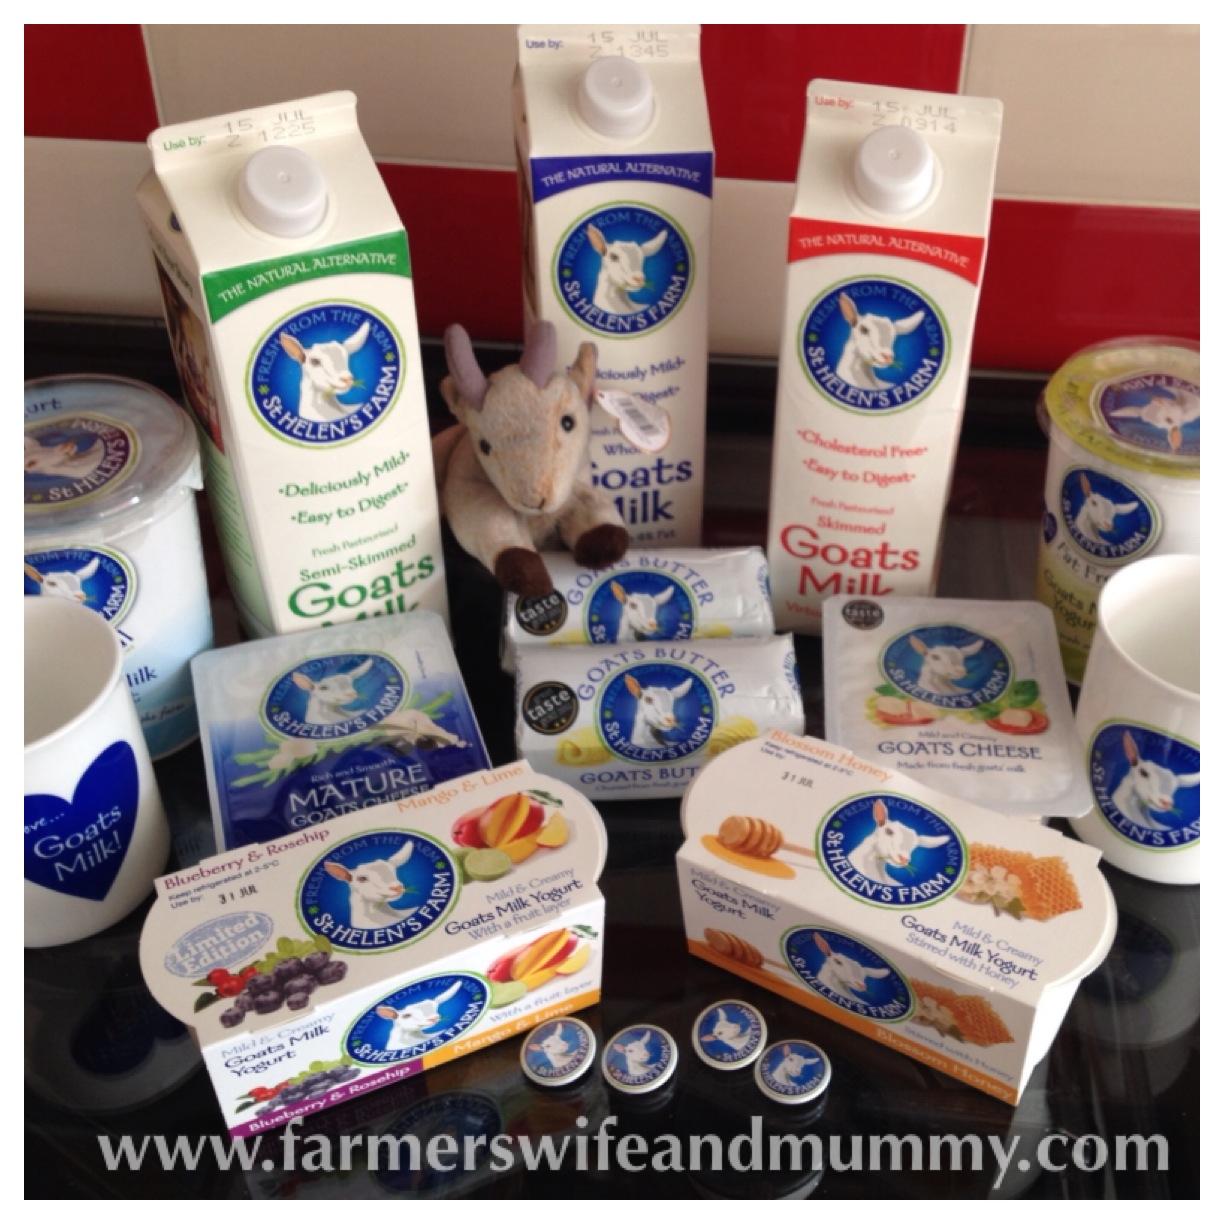 St Helen’s Farm Goats Products, a review.